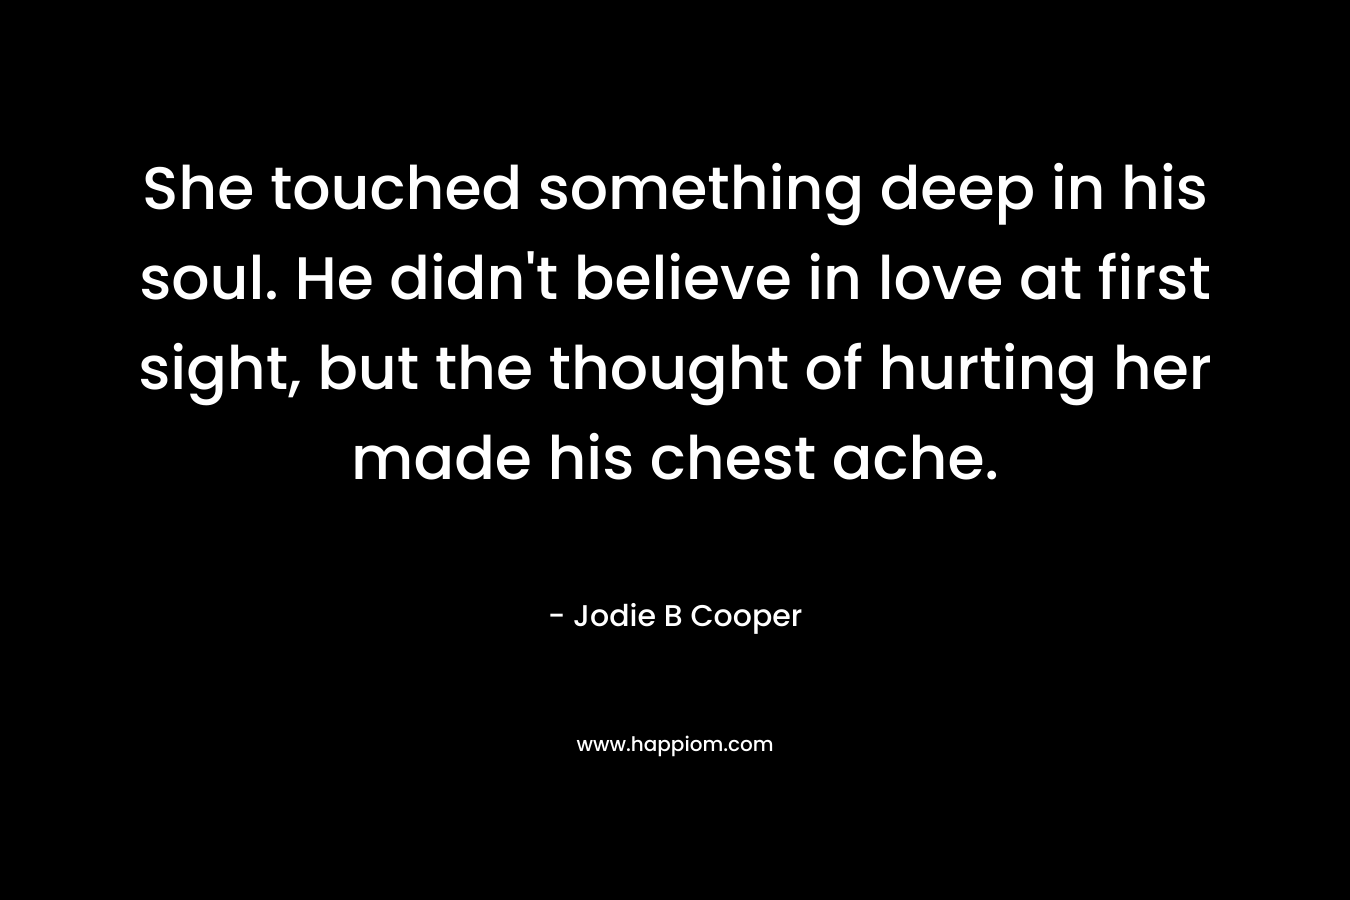 She touched something deep in his soul. He didn't believe in love at first sight, but the thought of hurting her made his chest ache.